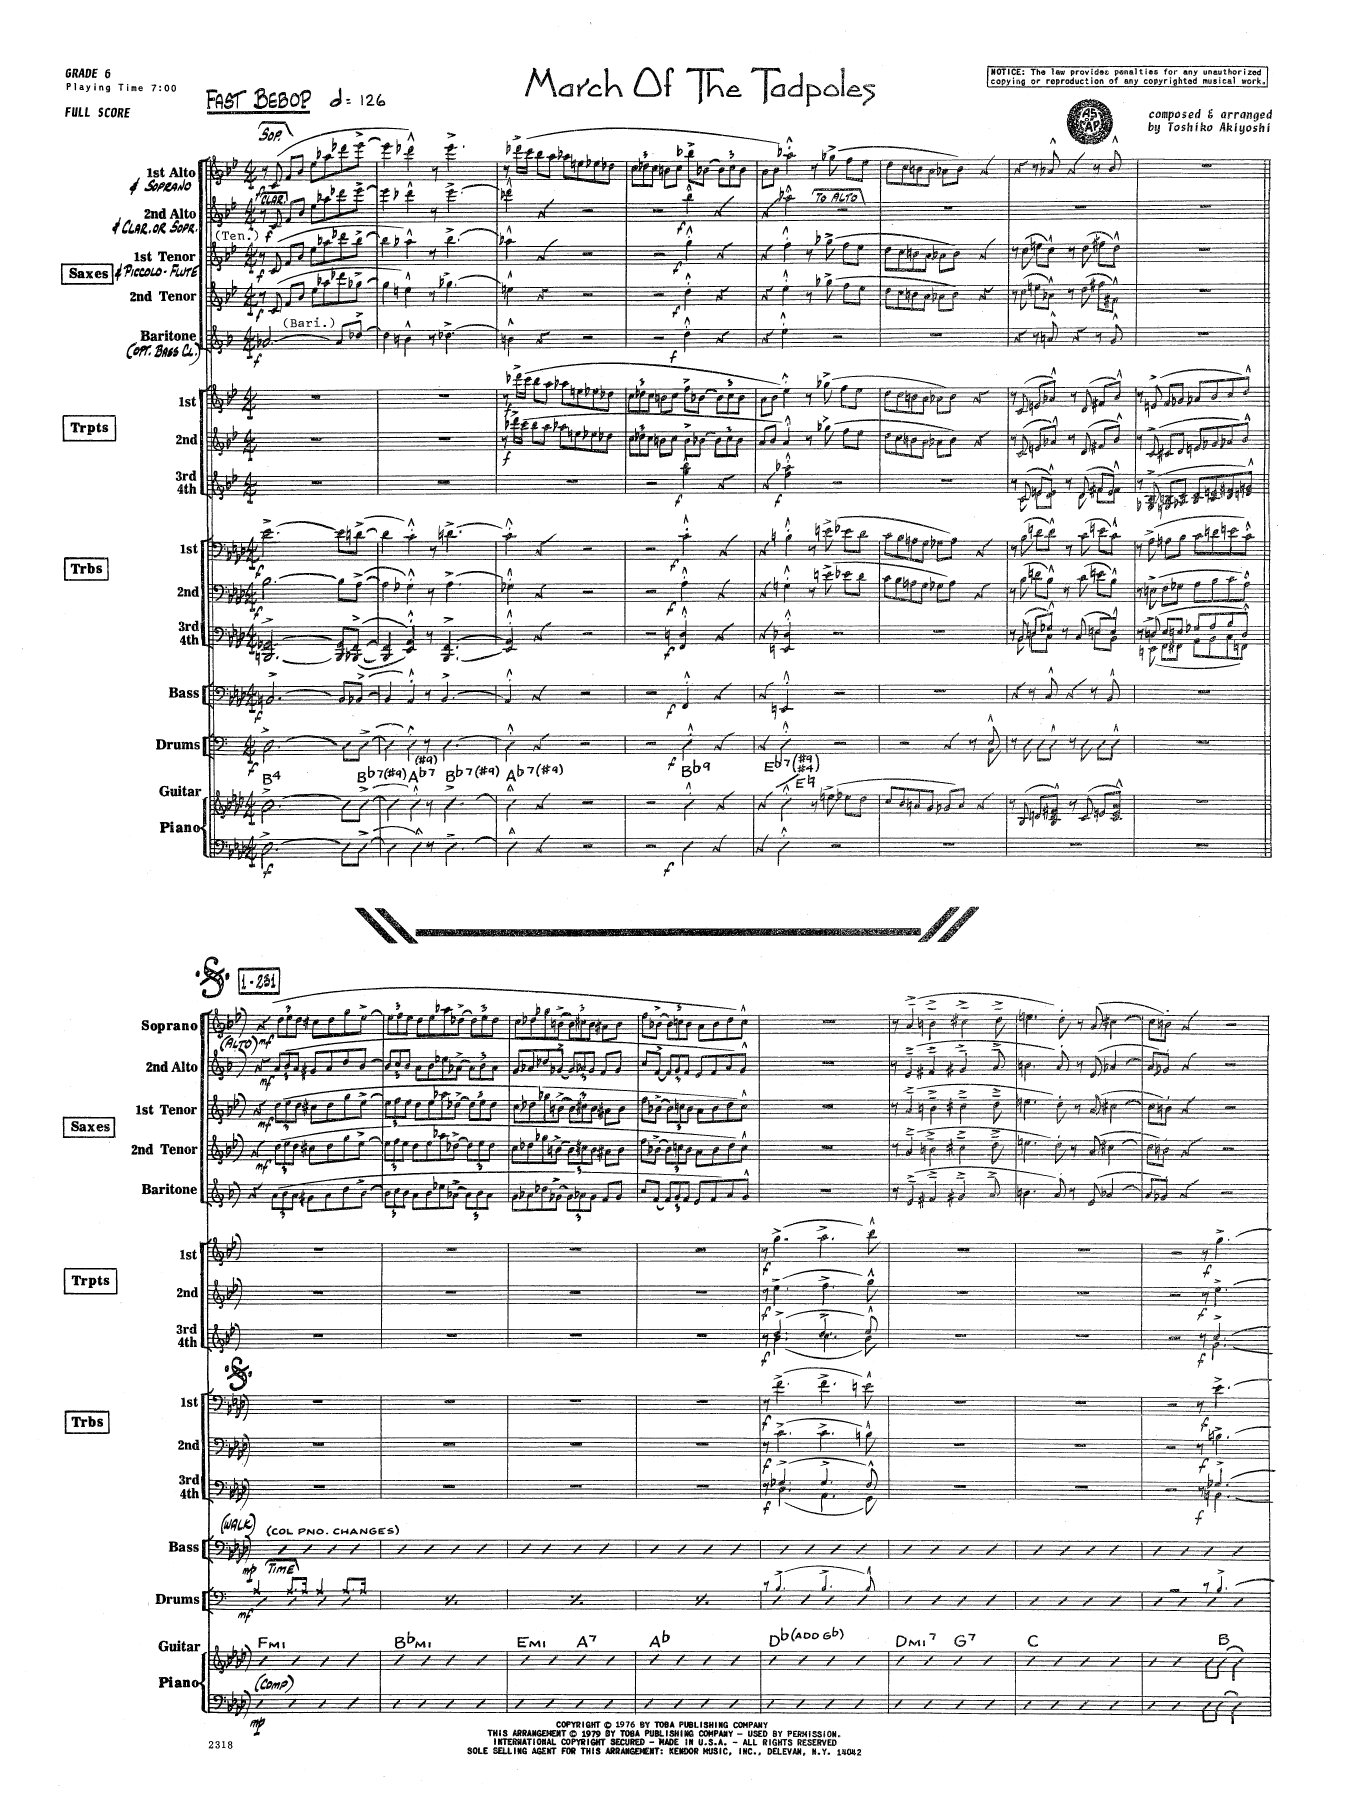 Toshiko Akiyoshi March Of The Tadpoles - Full Score sheet music preview music notes and score for Jazz Ensemble including 12 page(s)